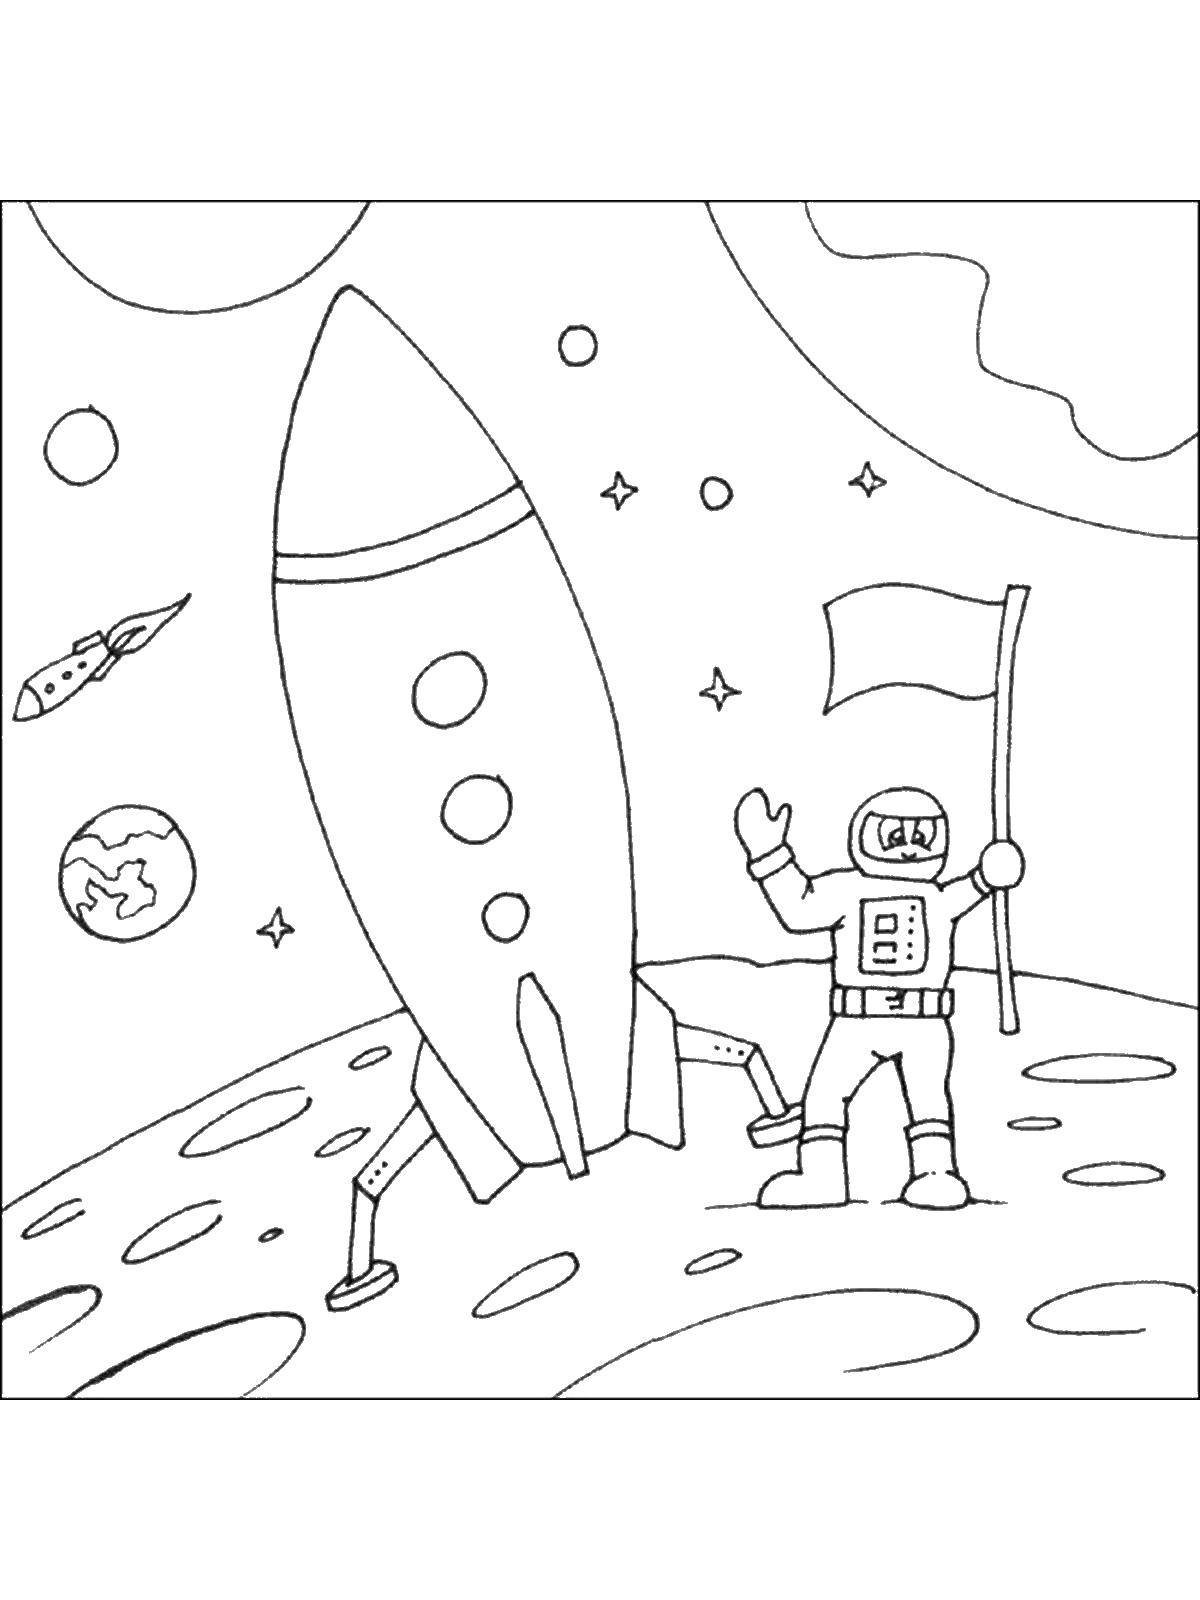 Coloring Rocket to the moon. Category space. Tags:  rocket, space.